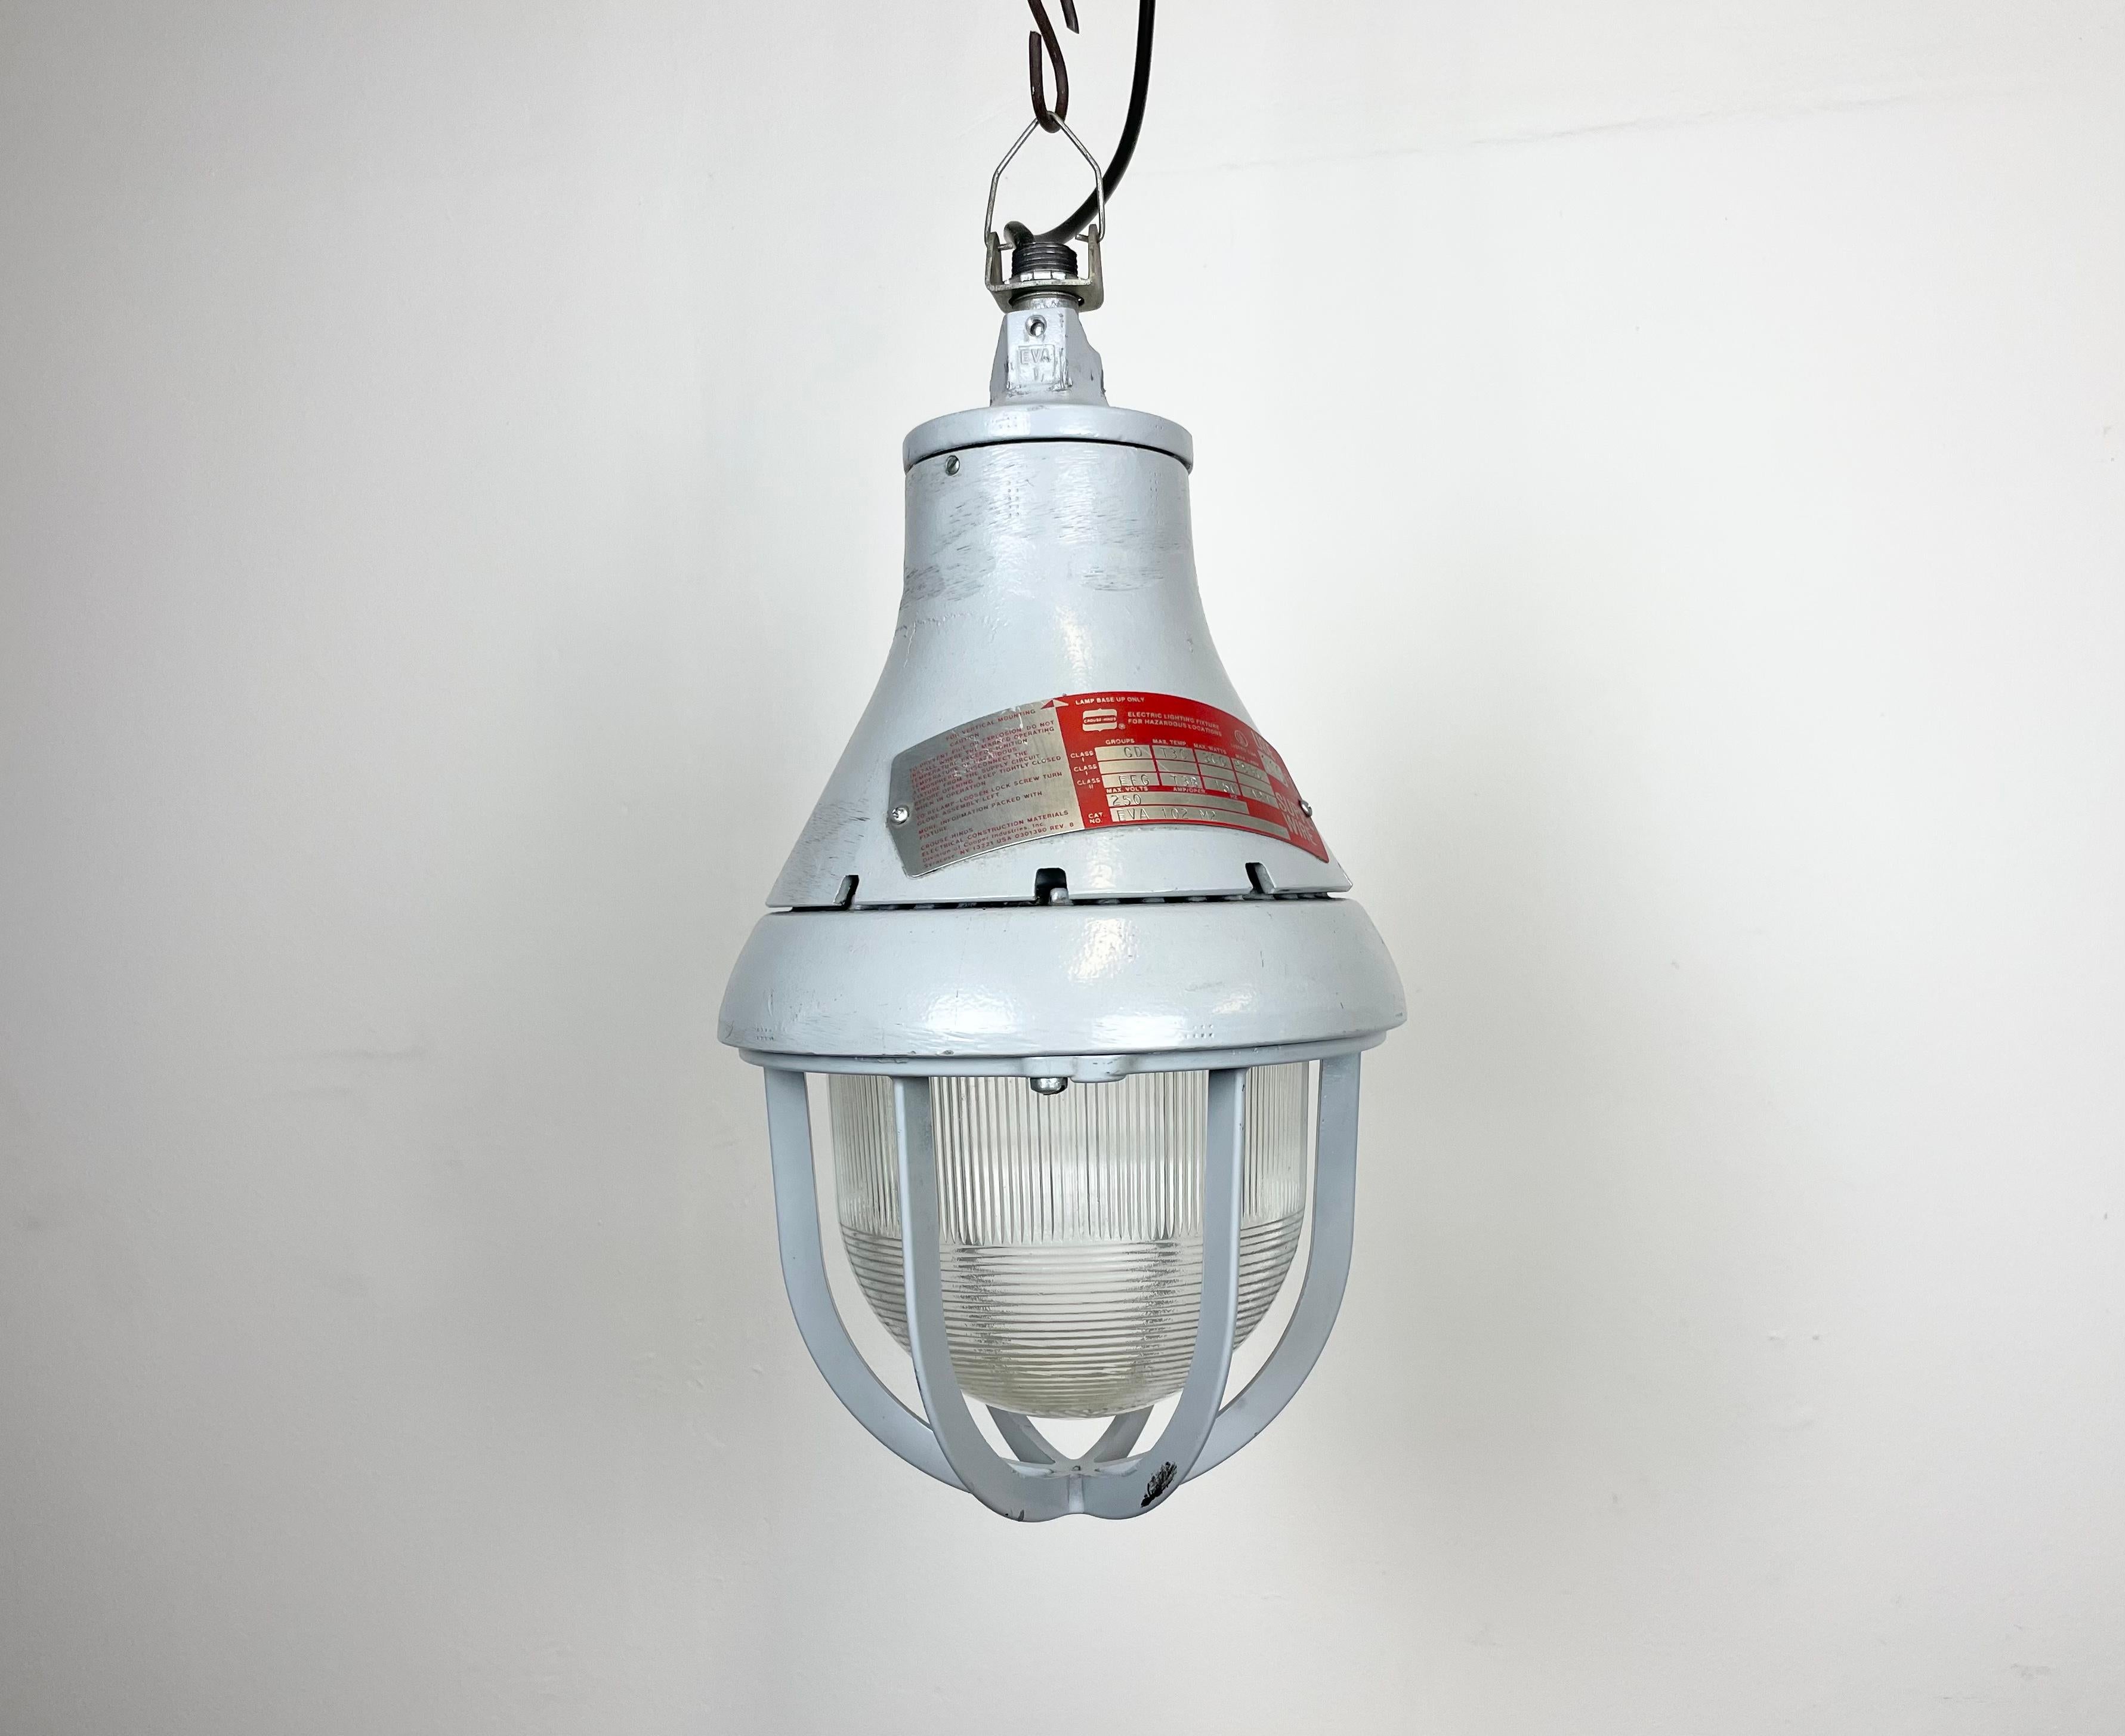 Industrial explosion proof light made by Crouse-Hinds in United States during the 1970s. It features a cast aluminium body and striped clear glass cover. The original socket requires E27/ E26 light bulbs.The weight of the lamp is 5 kg. New wire.